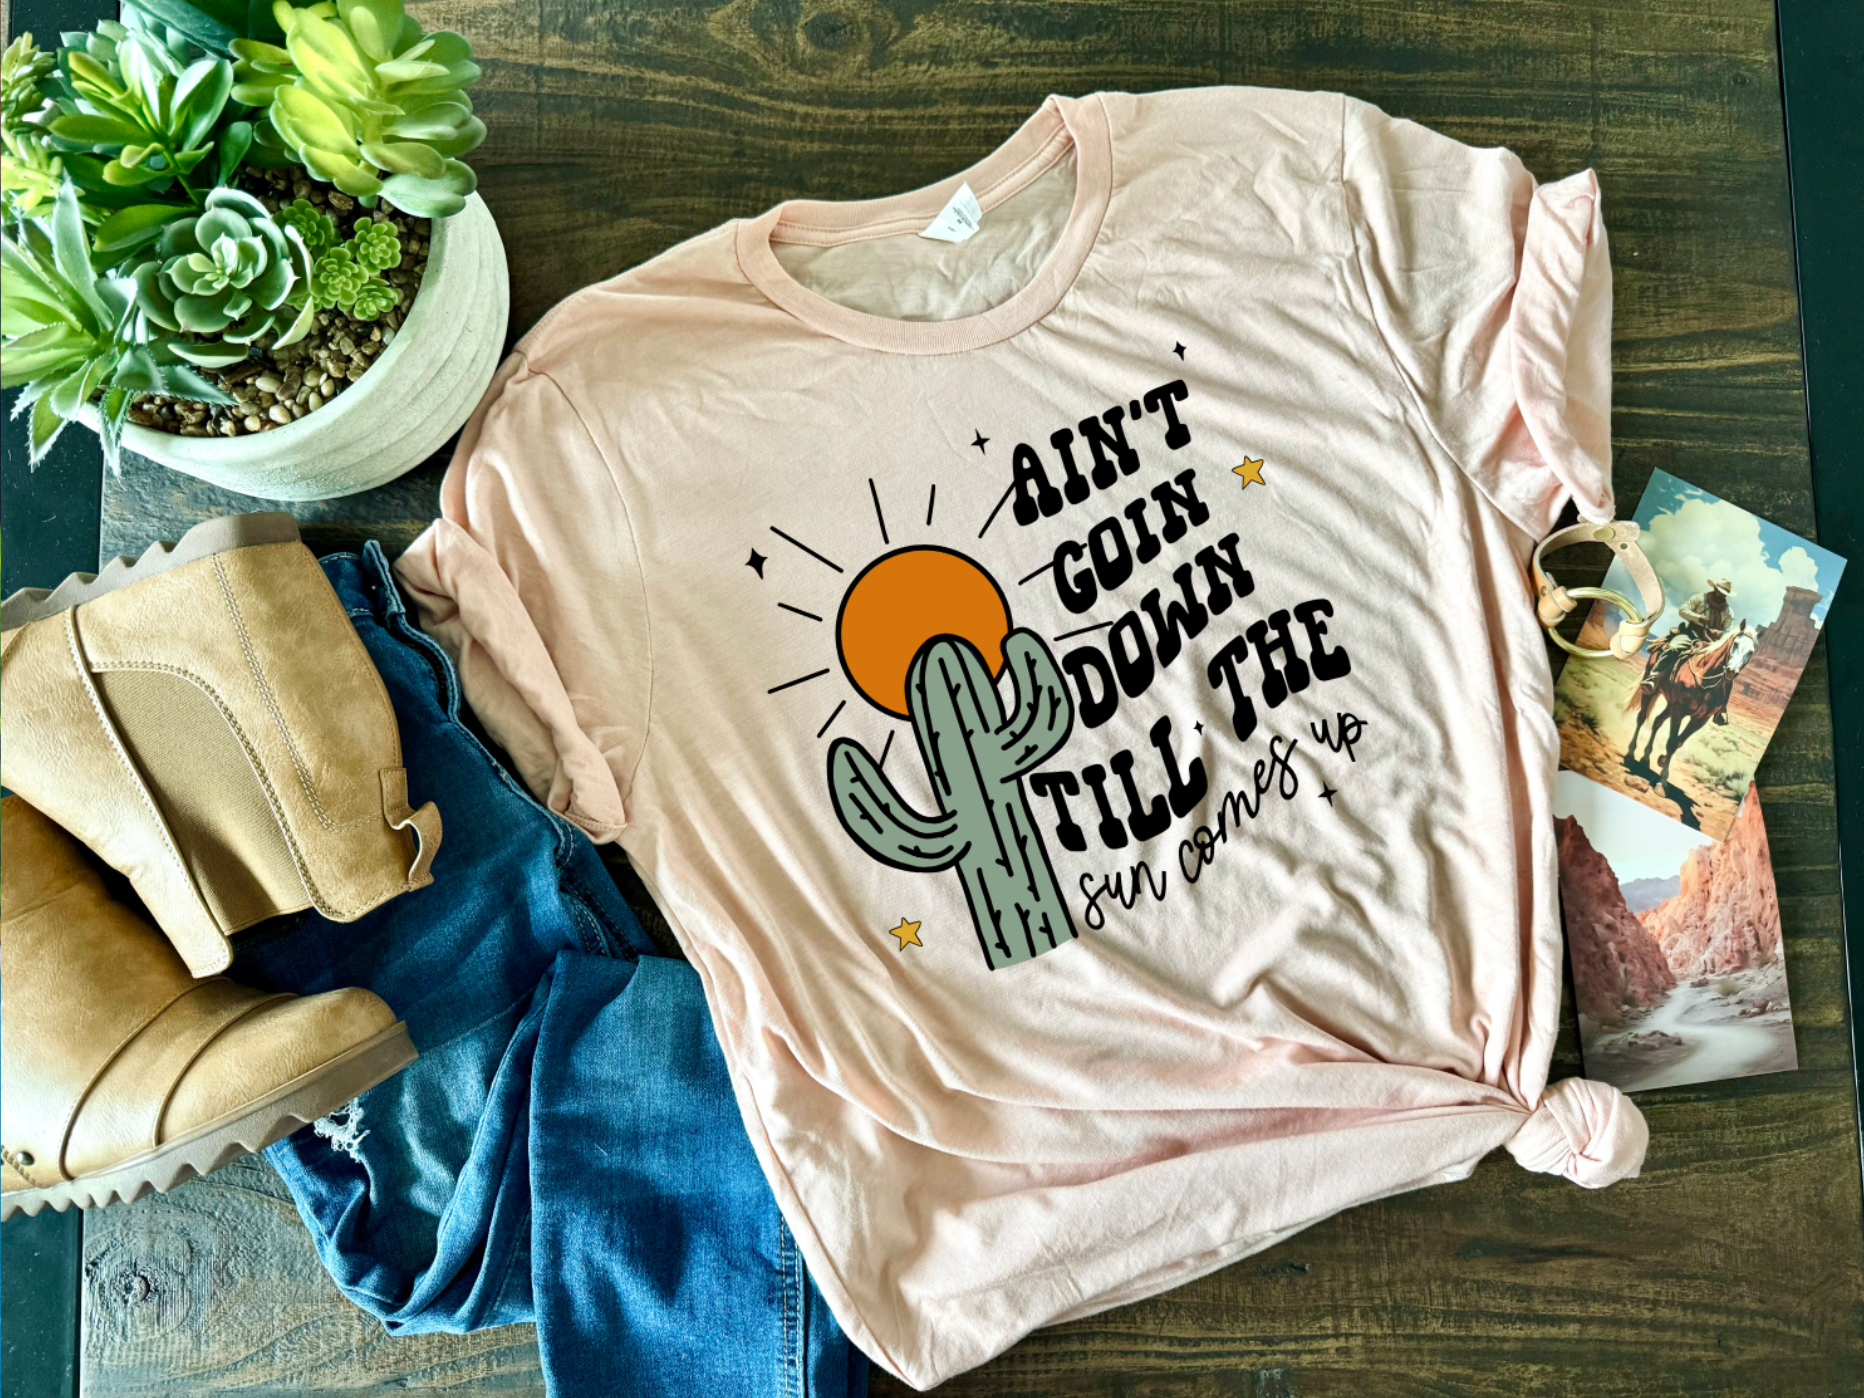 Peach Colored Bella and Canvas Unisex Tshirt with Ain't Goin Down Till The Sun Comes Up on it. Handmade in TX.